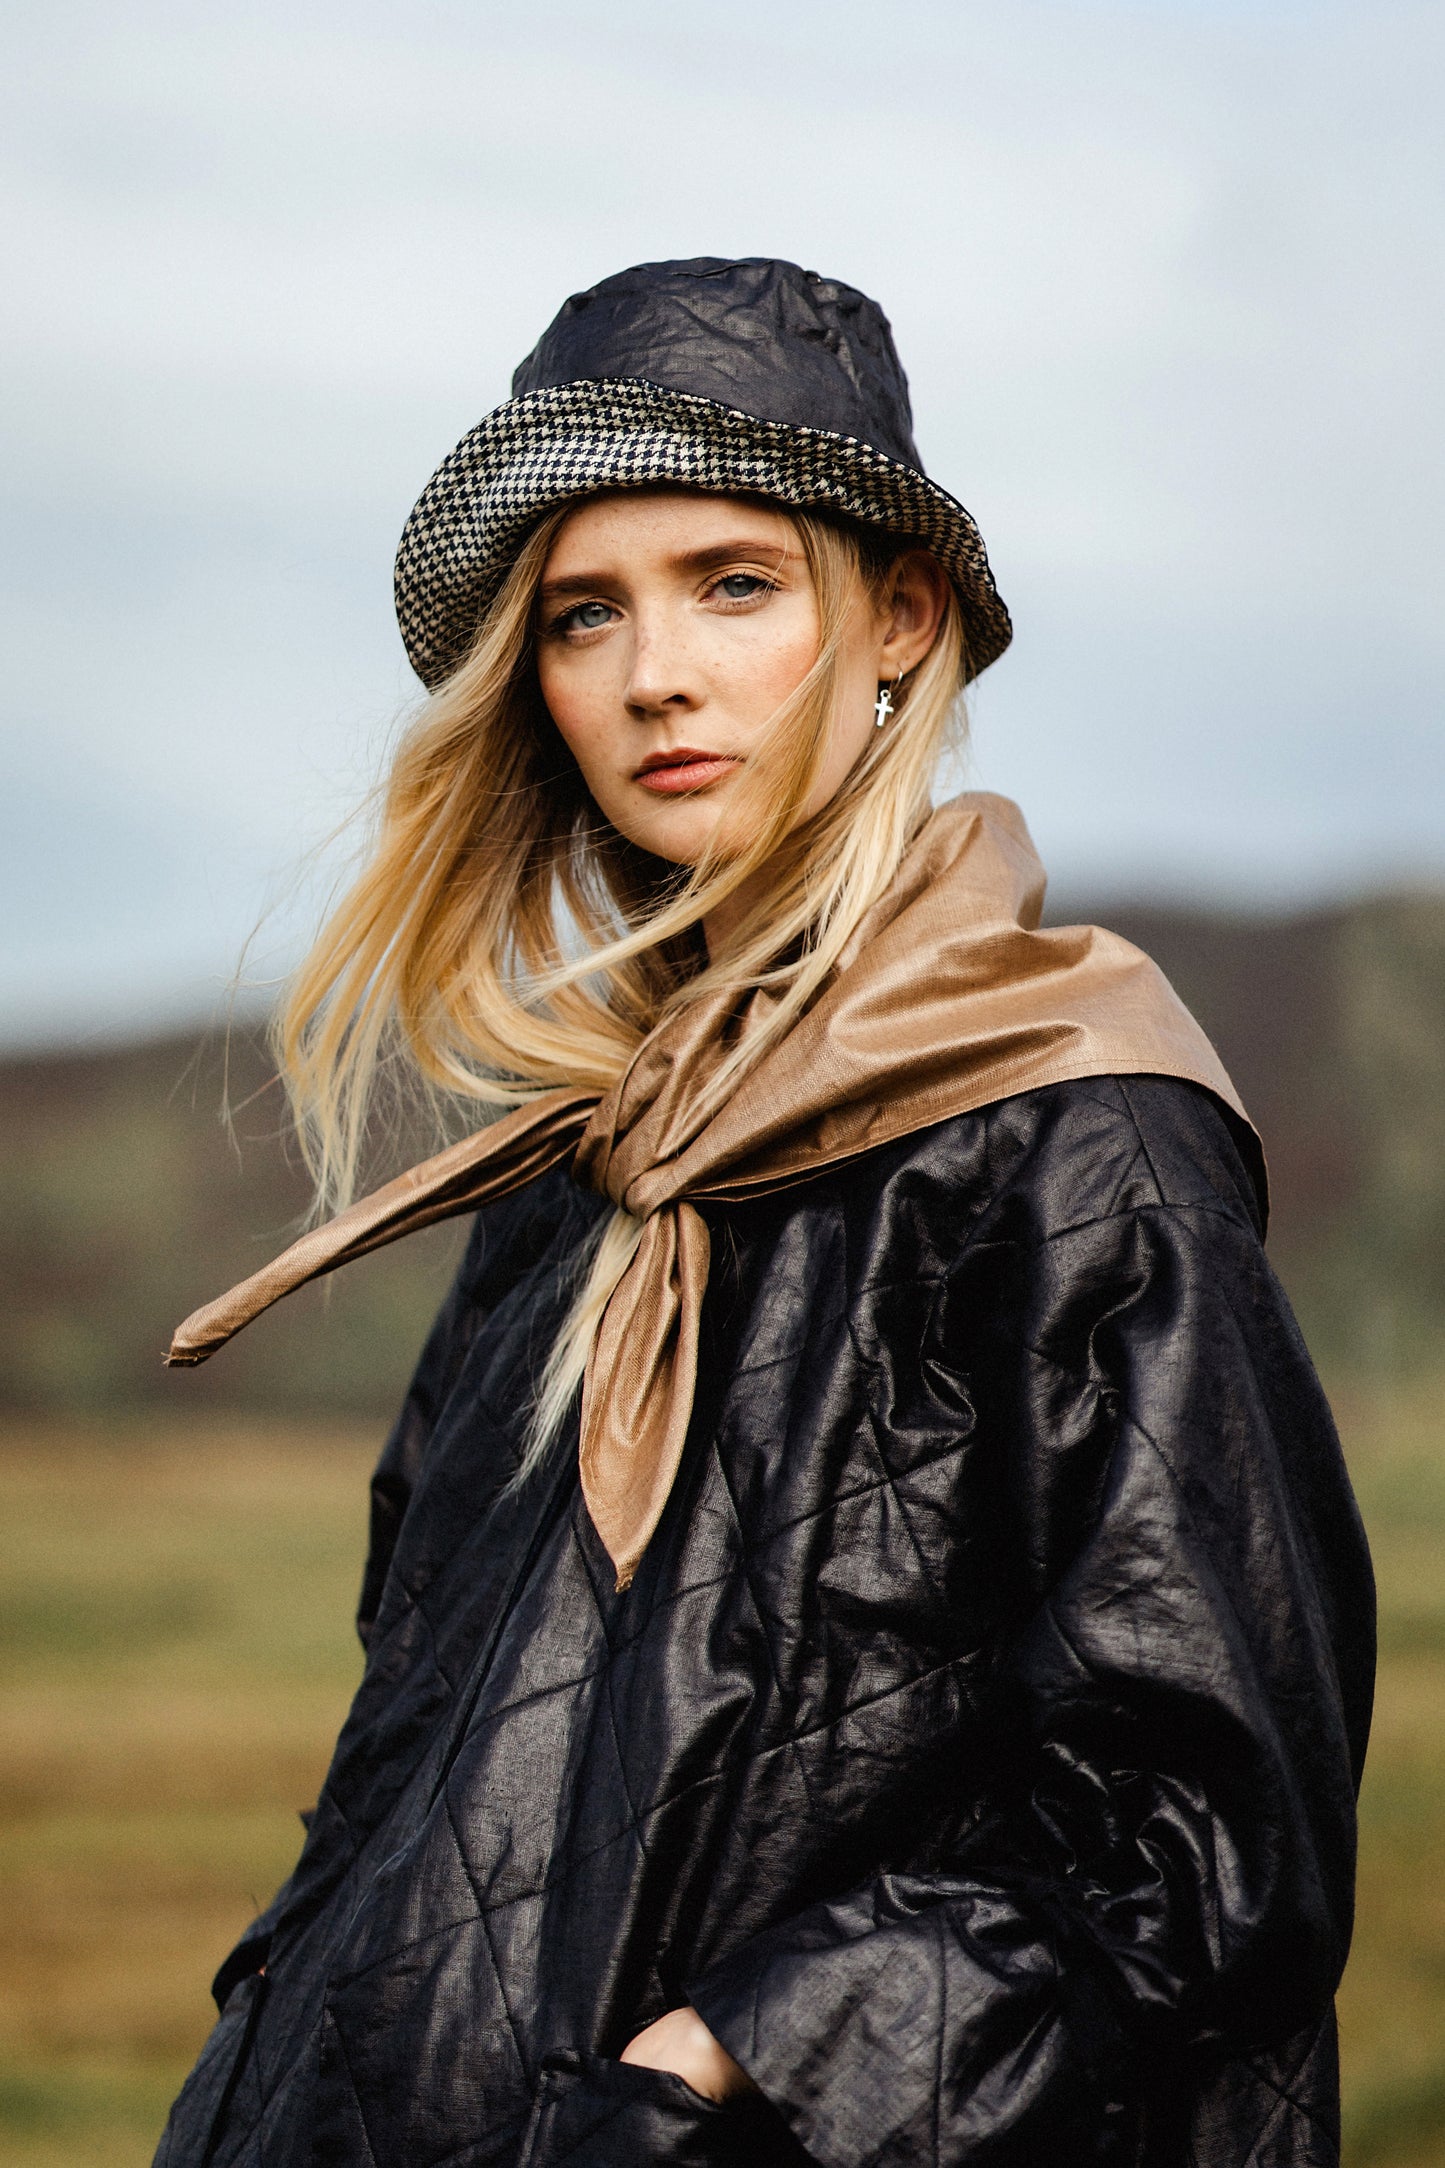 BEETLED SCARF | Our AW scarf, created with Irish beetled linen. The scarf, which comes in black and chocolate, is an interesting addition to any outfit. With the structure and sheen of the beetled linen, the scarf offers warmth, style and a wee bit of his